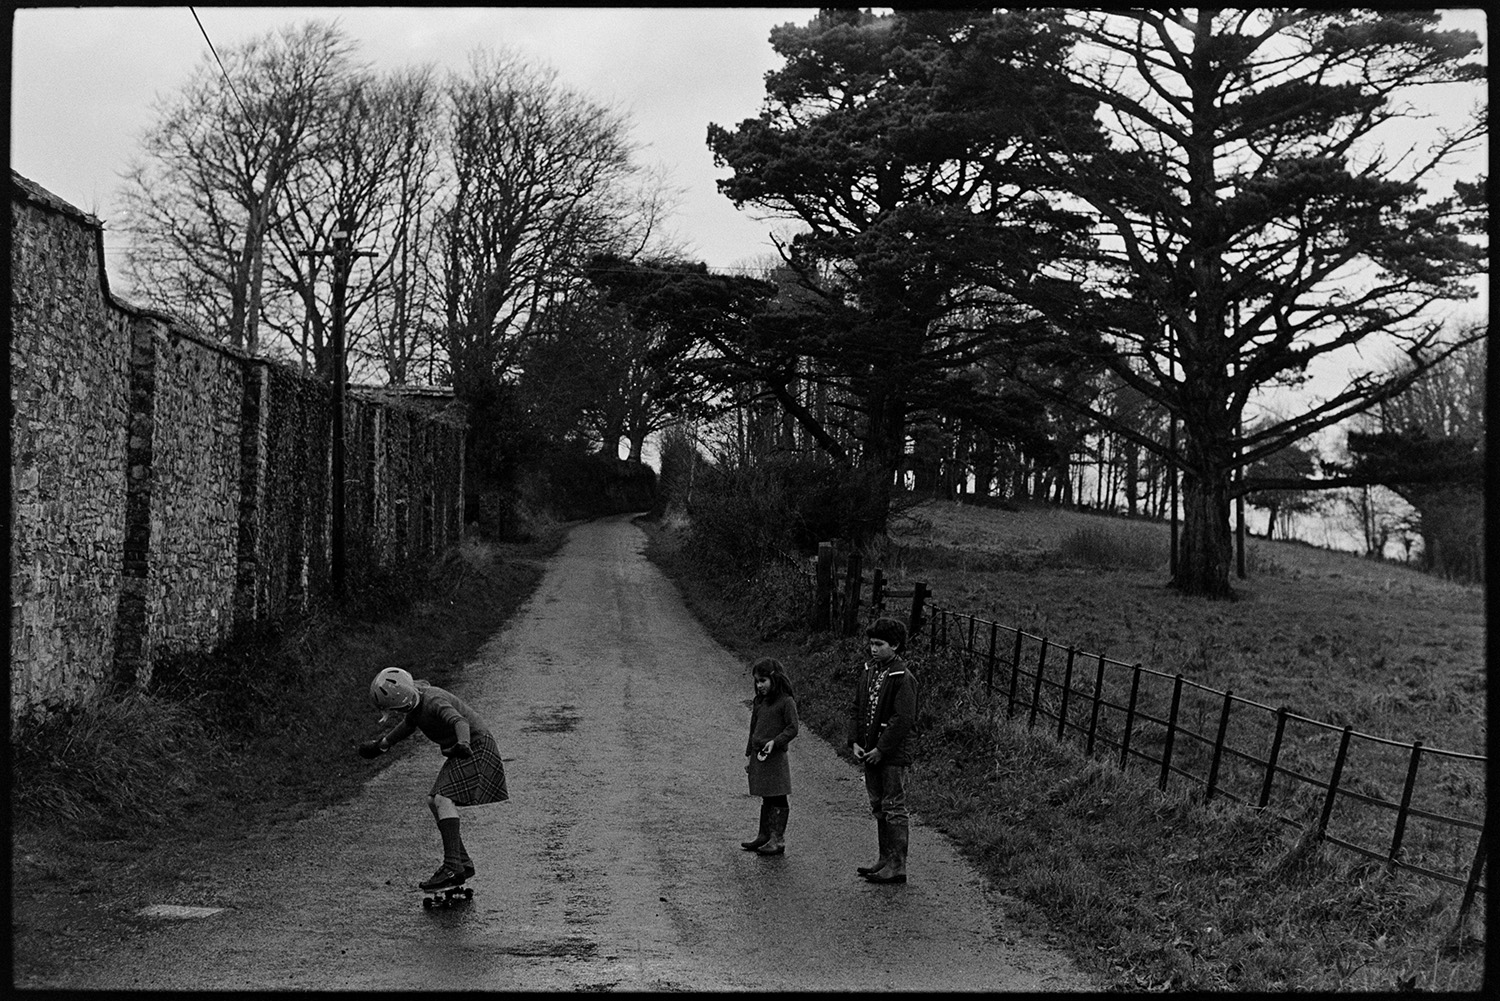 Children skateboarding. 
[A girl skateboarding along a road by a stone wall at Halsdon, Dolton. Two other children are watching.]